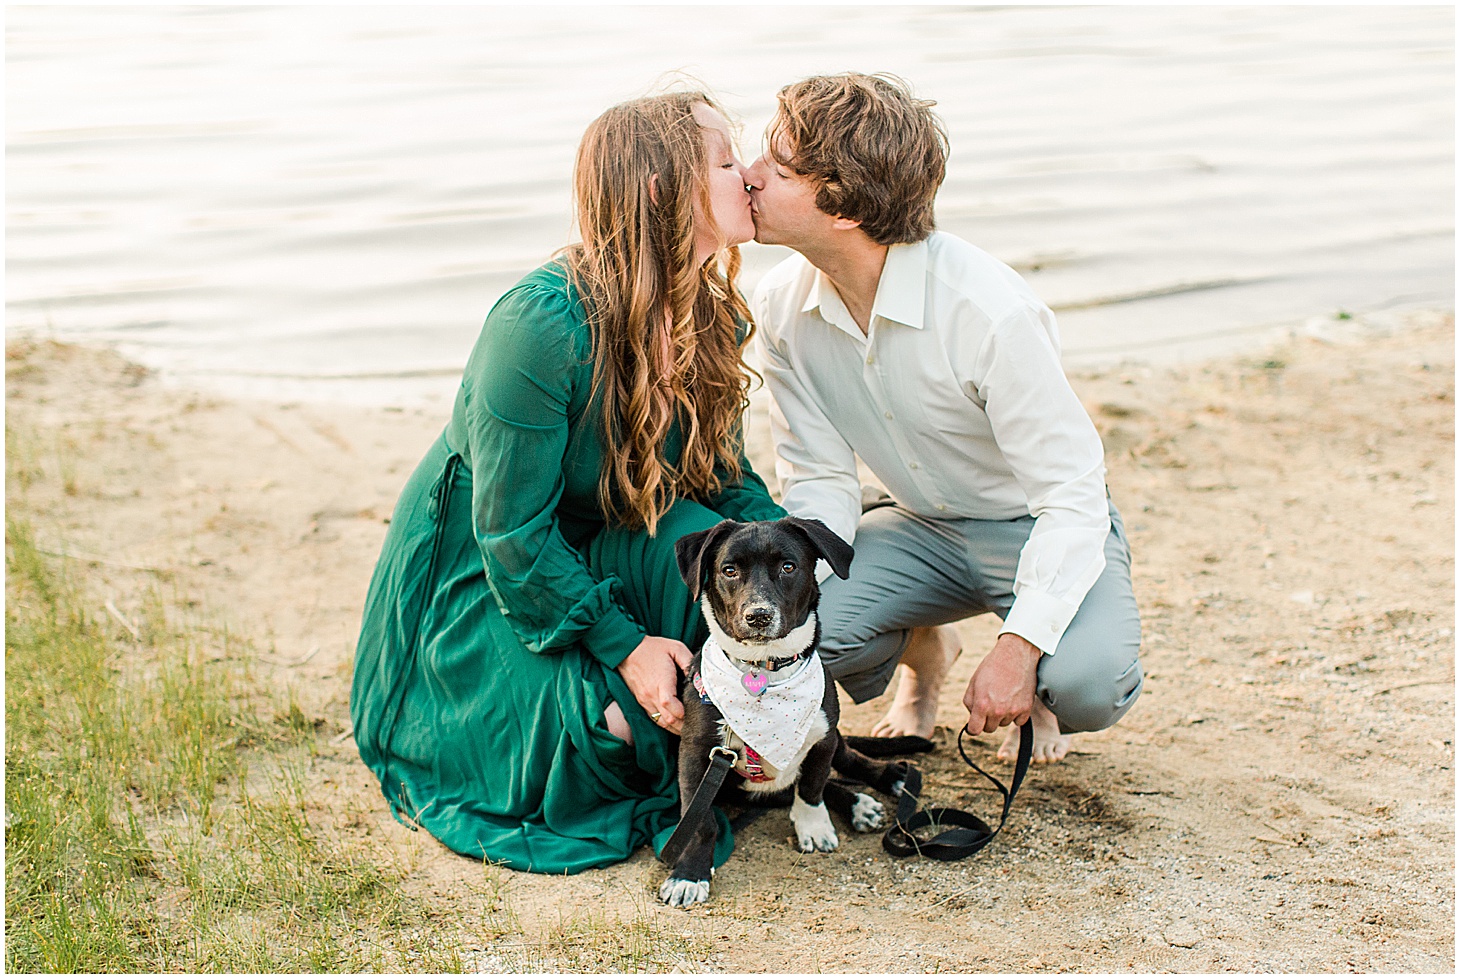 carvinscoveengagementsession_roanokeengagementsession_carvinscove_virginiawedding_virginiaweddingphotographer_vaweddingphotographer_photo_0069.jpg